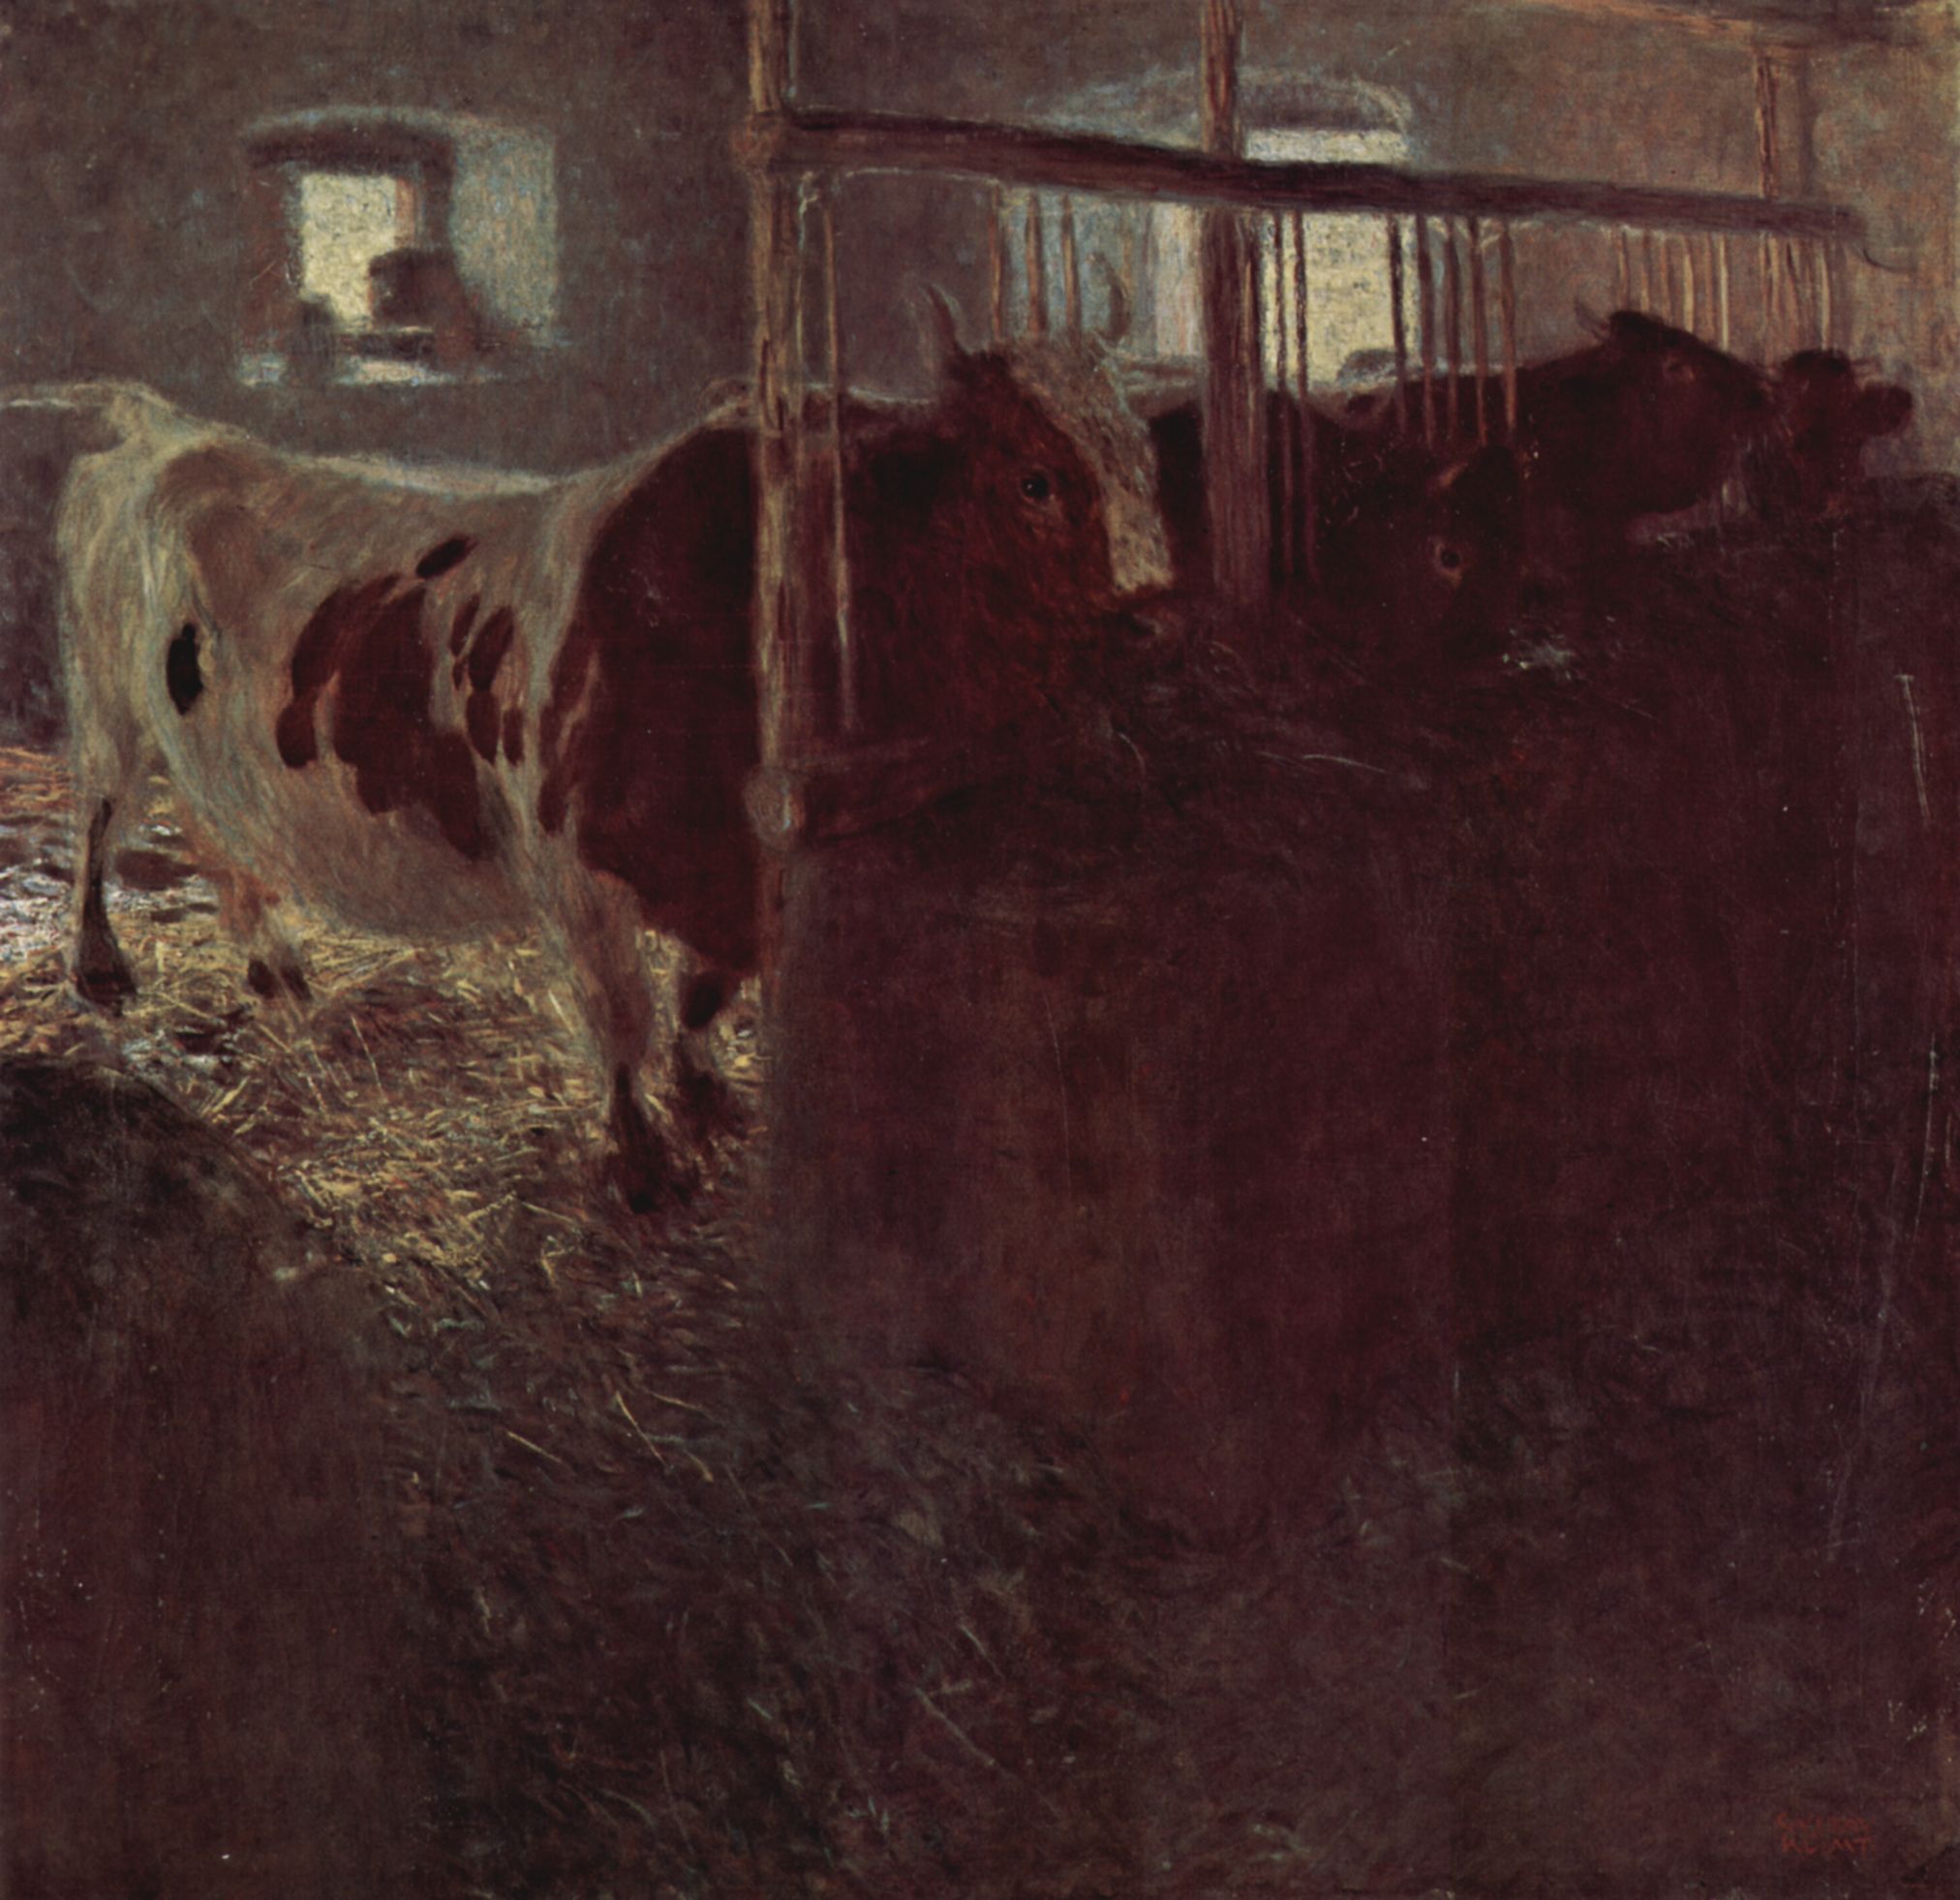 Cows in the barn (1901).